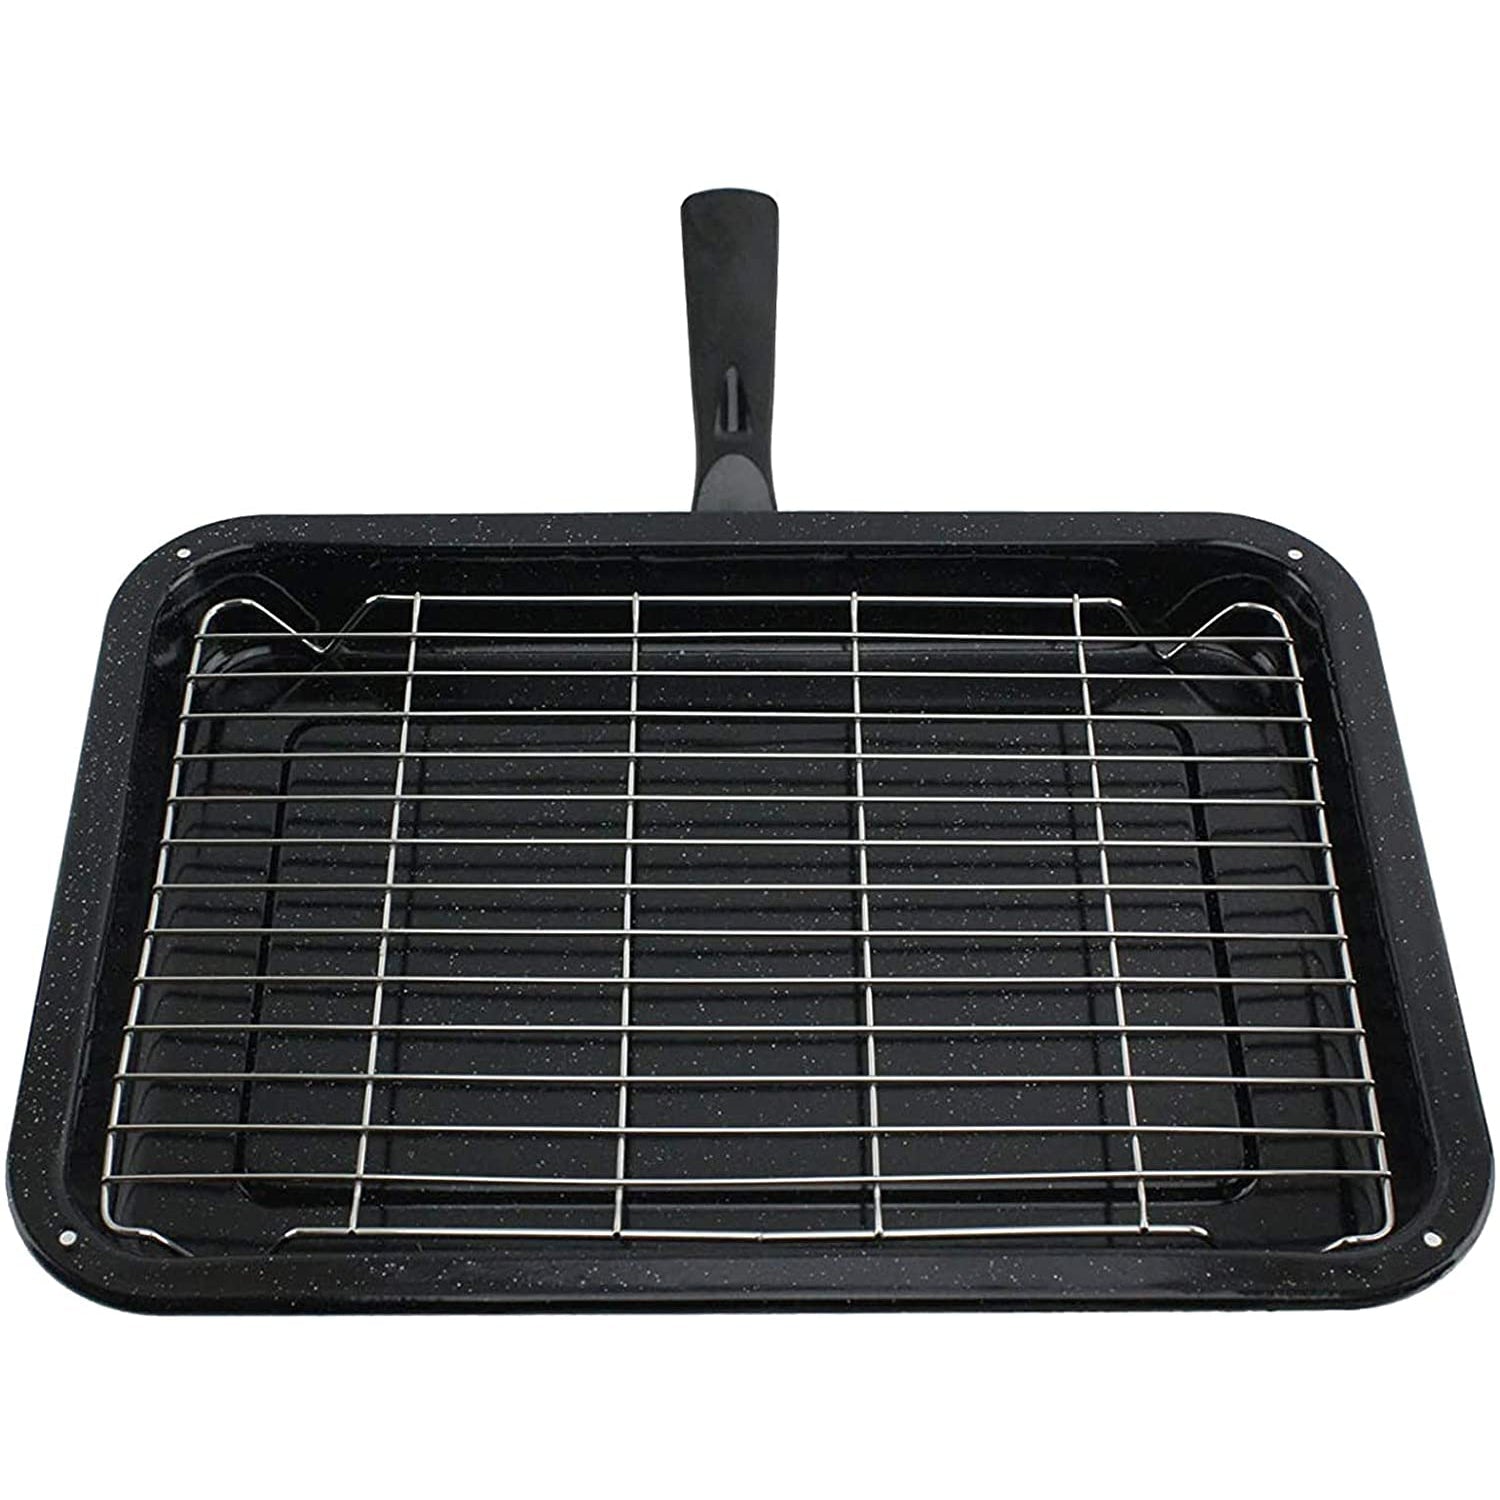 Small Grill Pan + Rack and Detachable Handle for ZANUSSI Oven Cooker